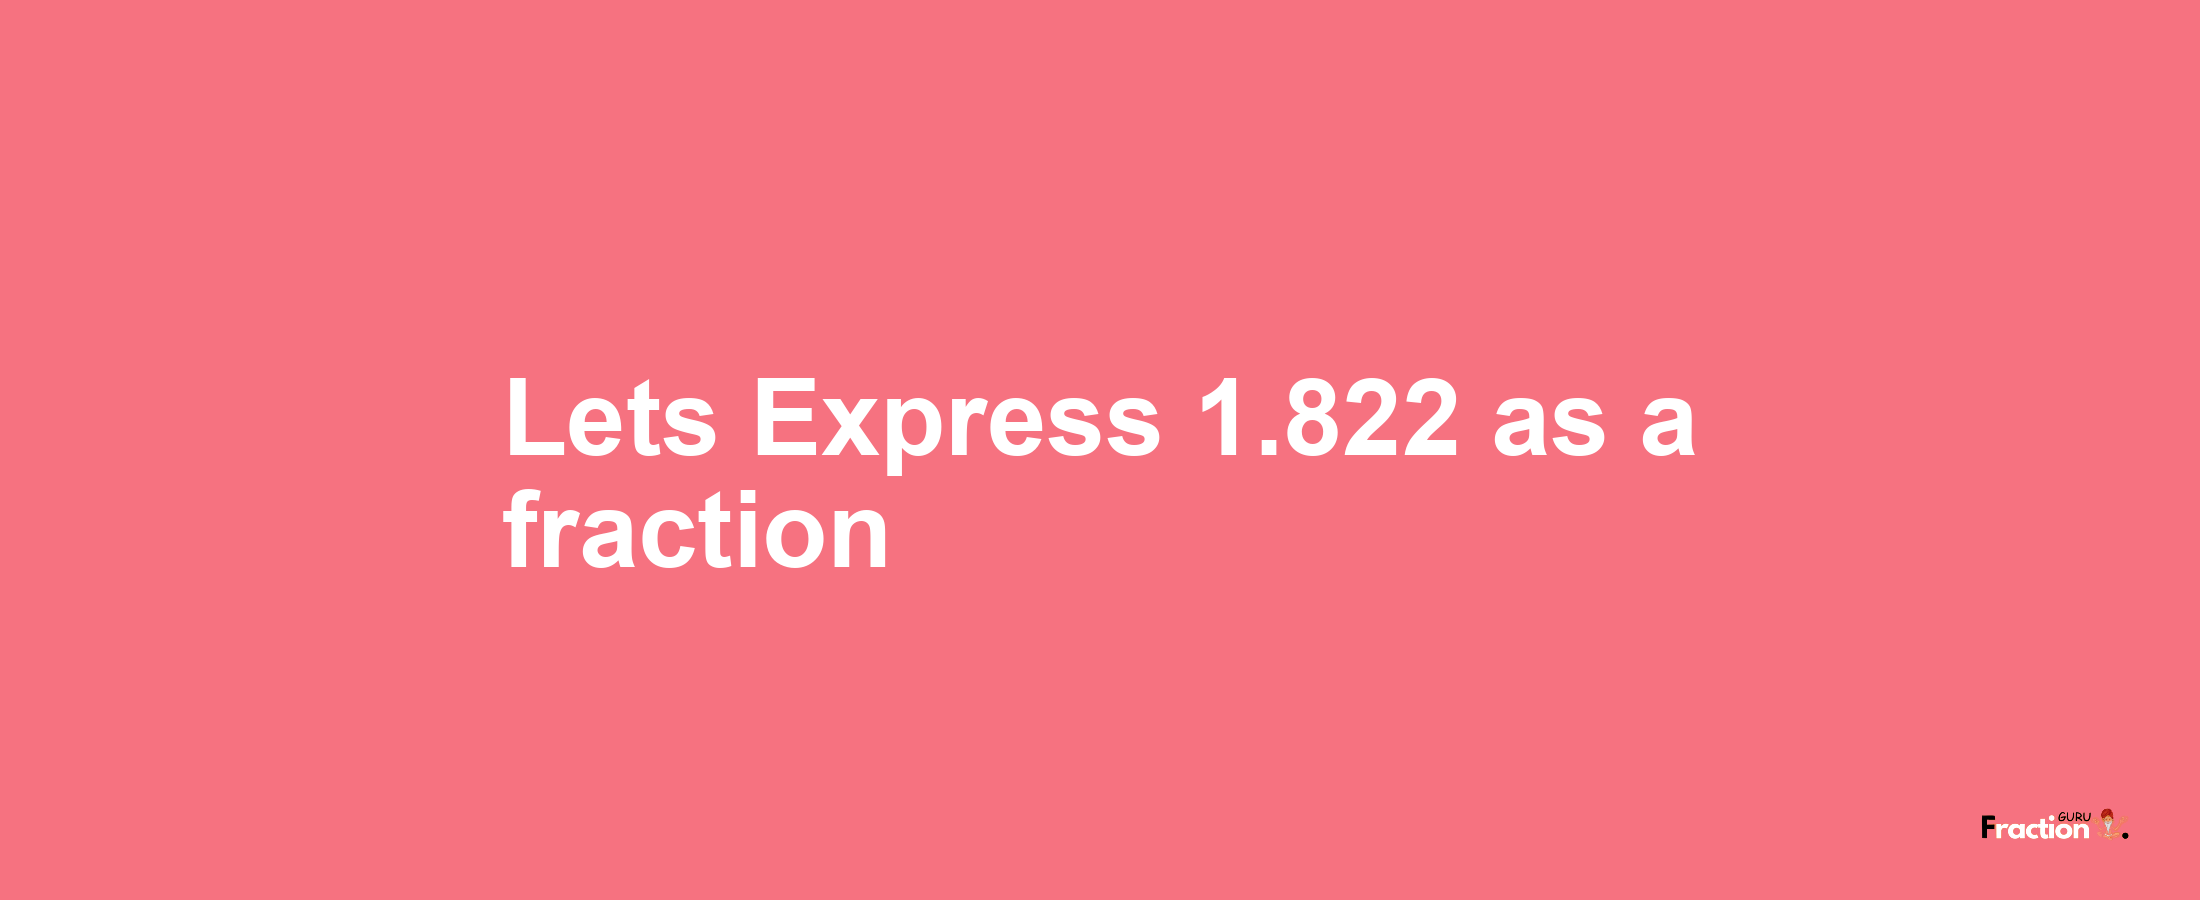 Lets Express 1.822 as afraction